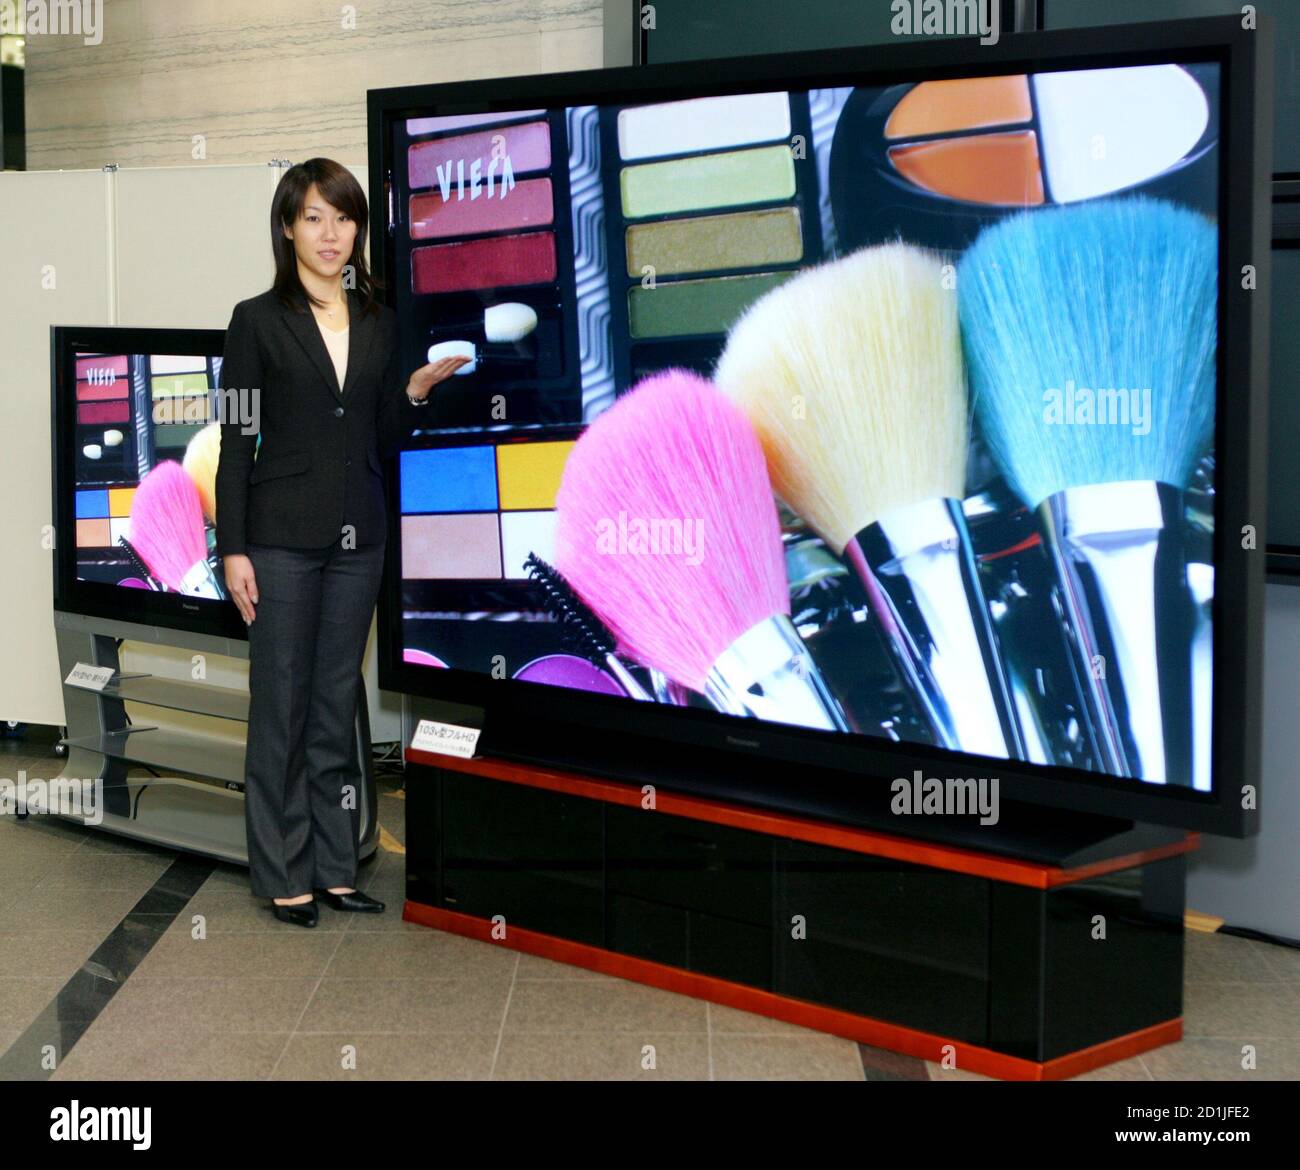 Japan's Matsushita Electric Industrial Co. Ltd. official Satoko Kubo  presents its world's largest 103-inch plasma display panel (PDP) in Tokyo  February 2, 2006. Matsushita posted its highest quarterly profit in 14 years